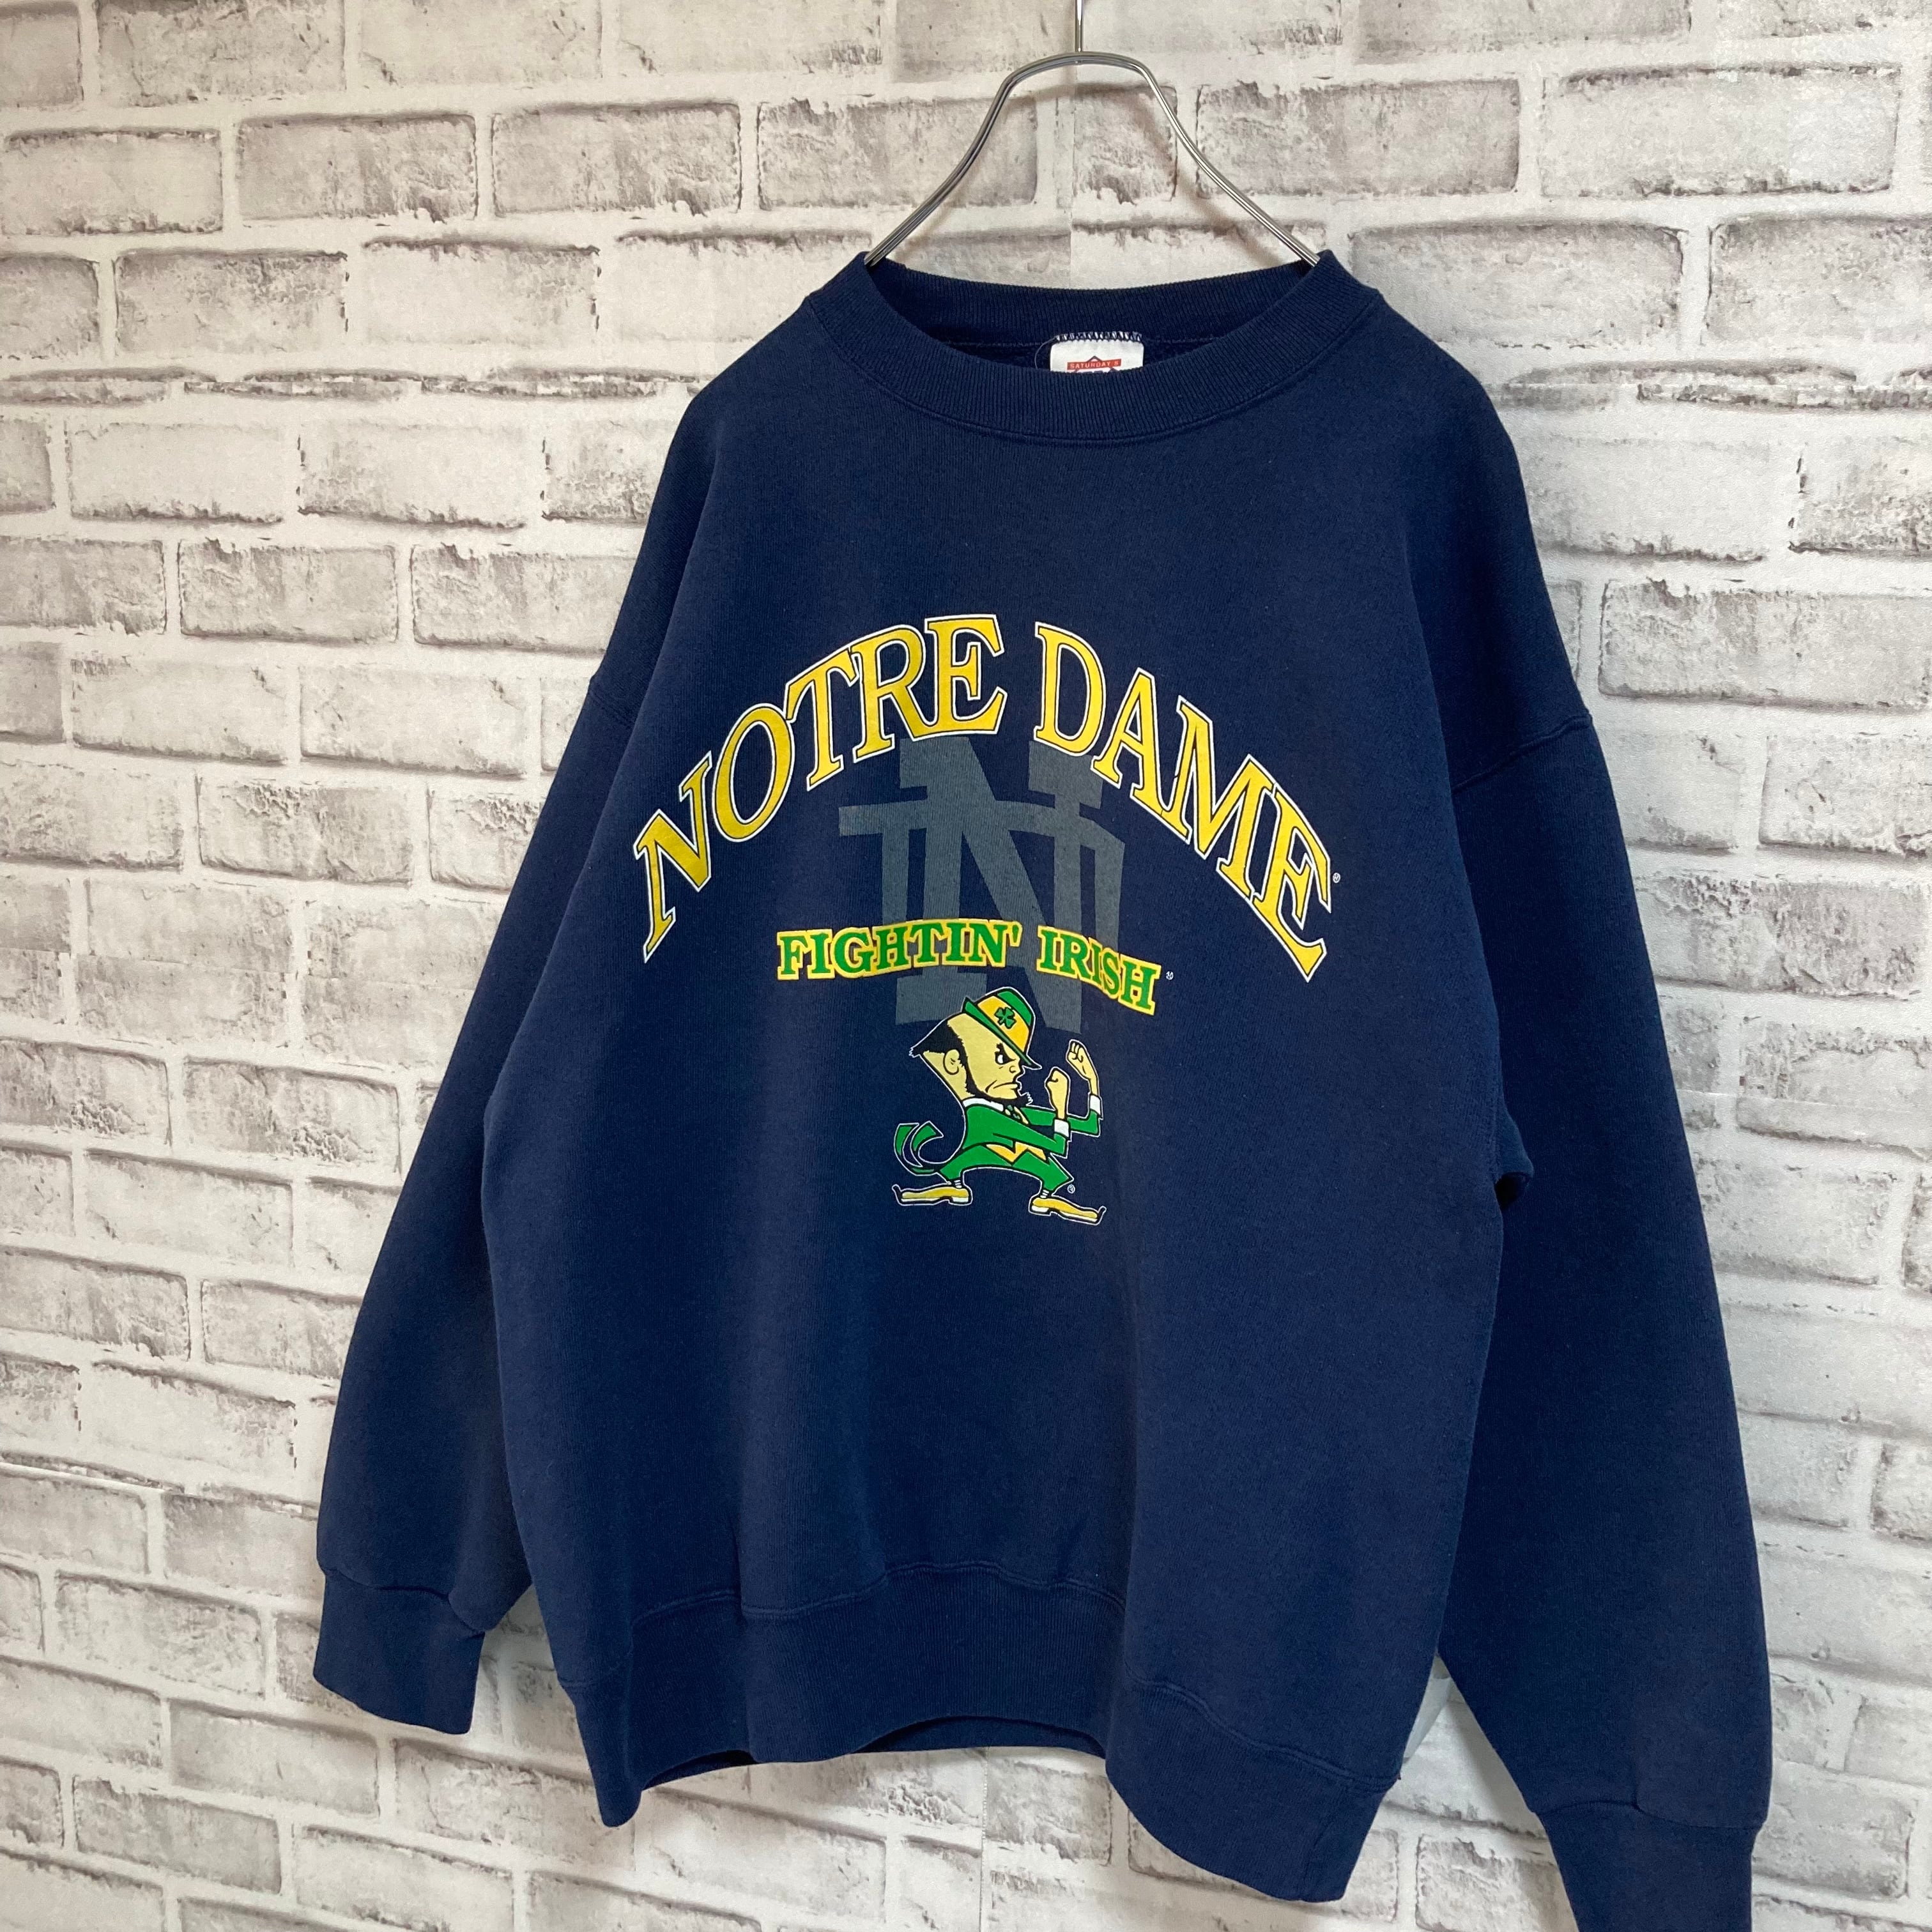 SATURDAY'S HERO】L/S Sweat L Made in USA 90s “NOTRE DAME” スウェット トレーナー USA製  ノートルダム大学 カレッジロゴ vintage ヴィンテージ アメリカ USA 古着 Fuzzy Fuzzy